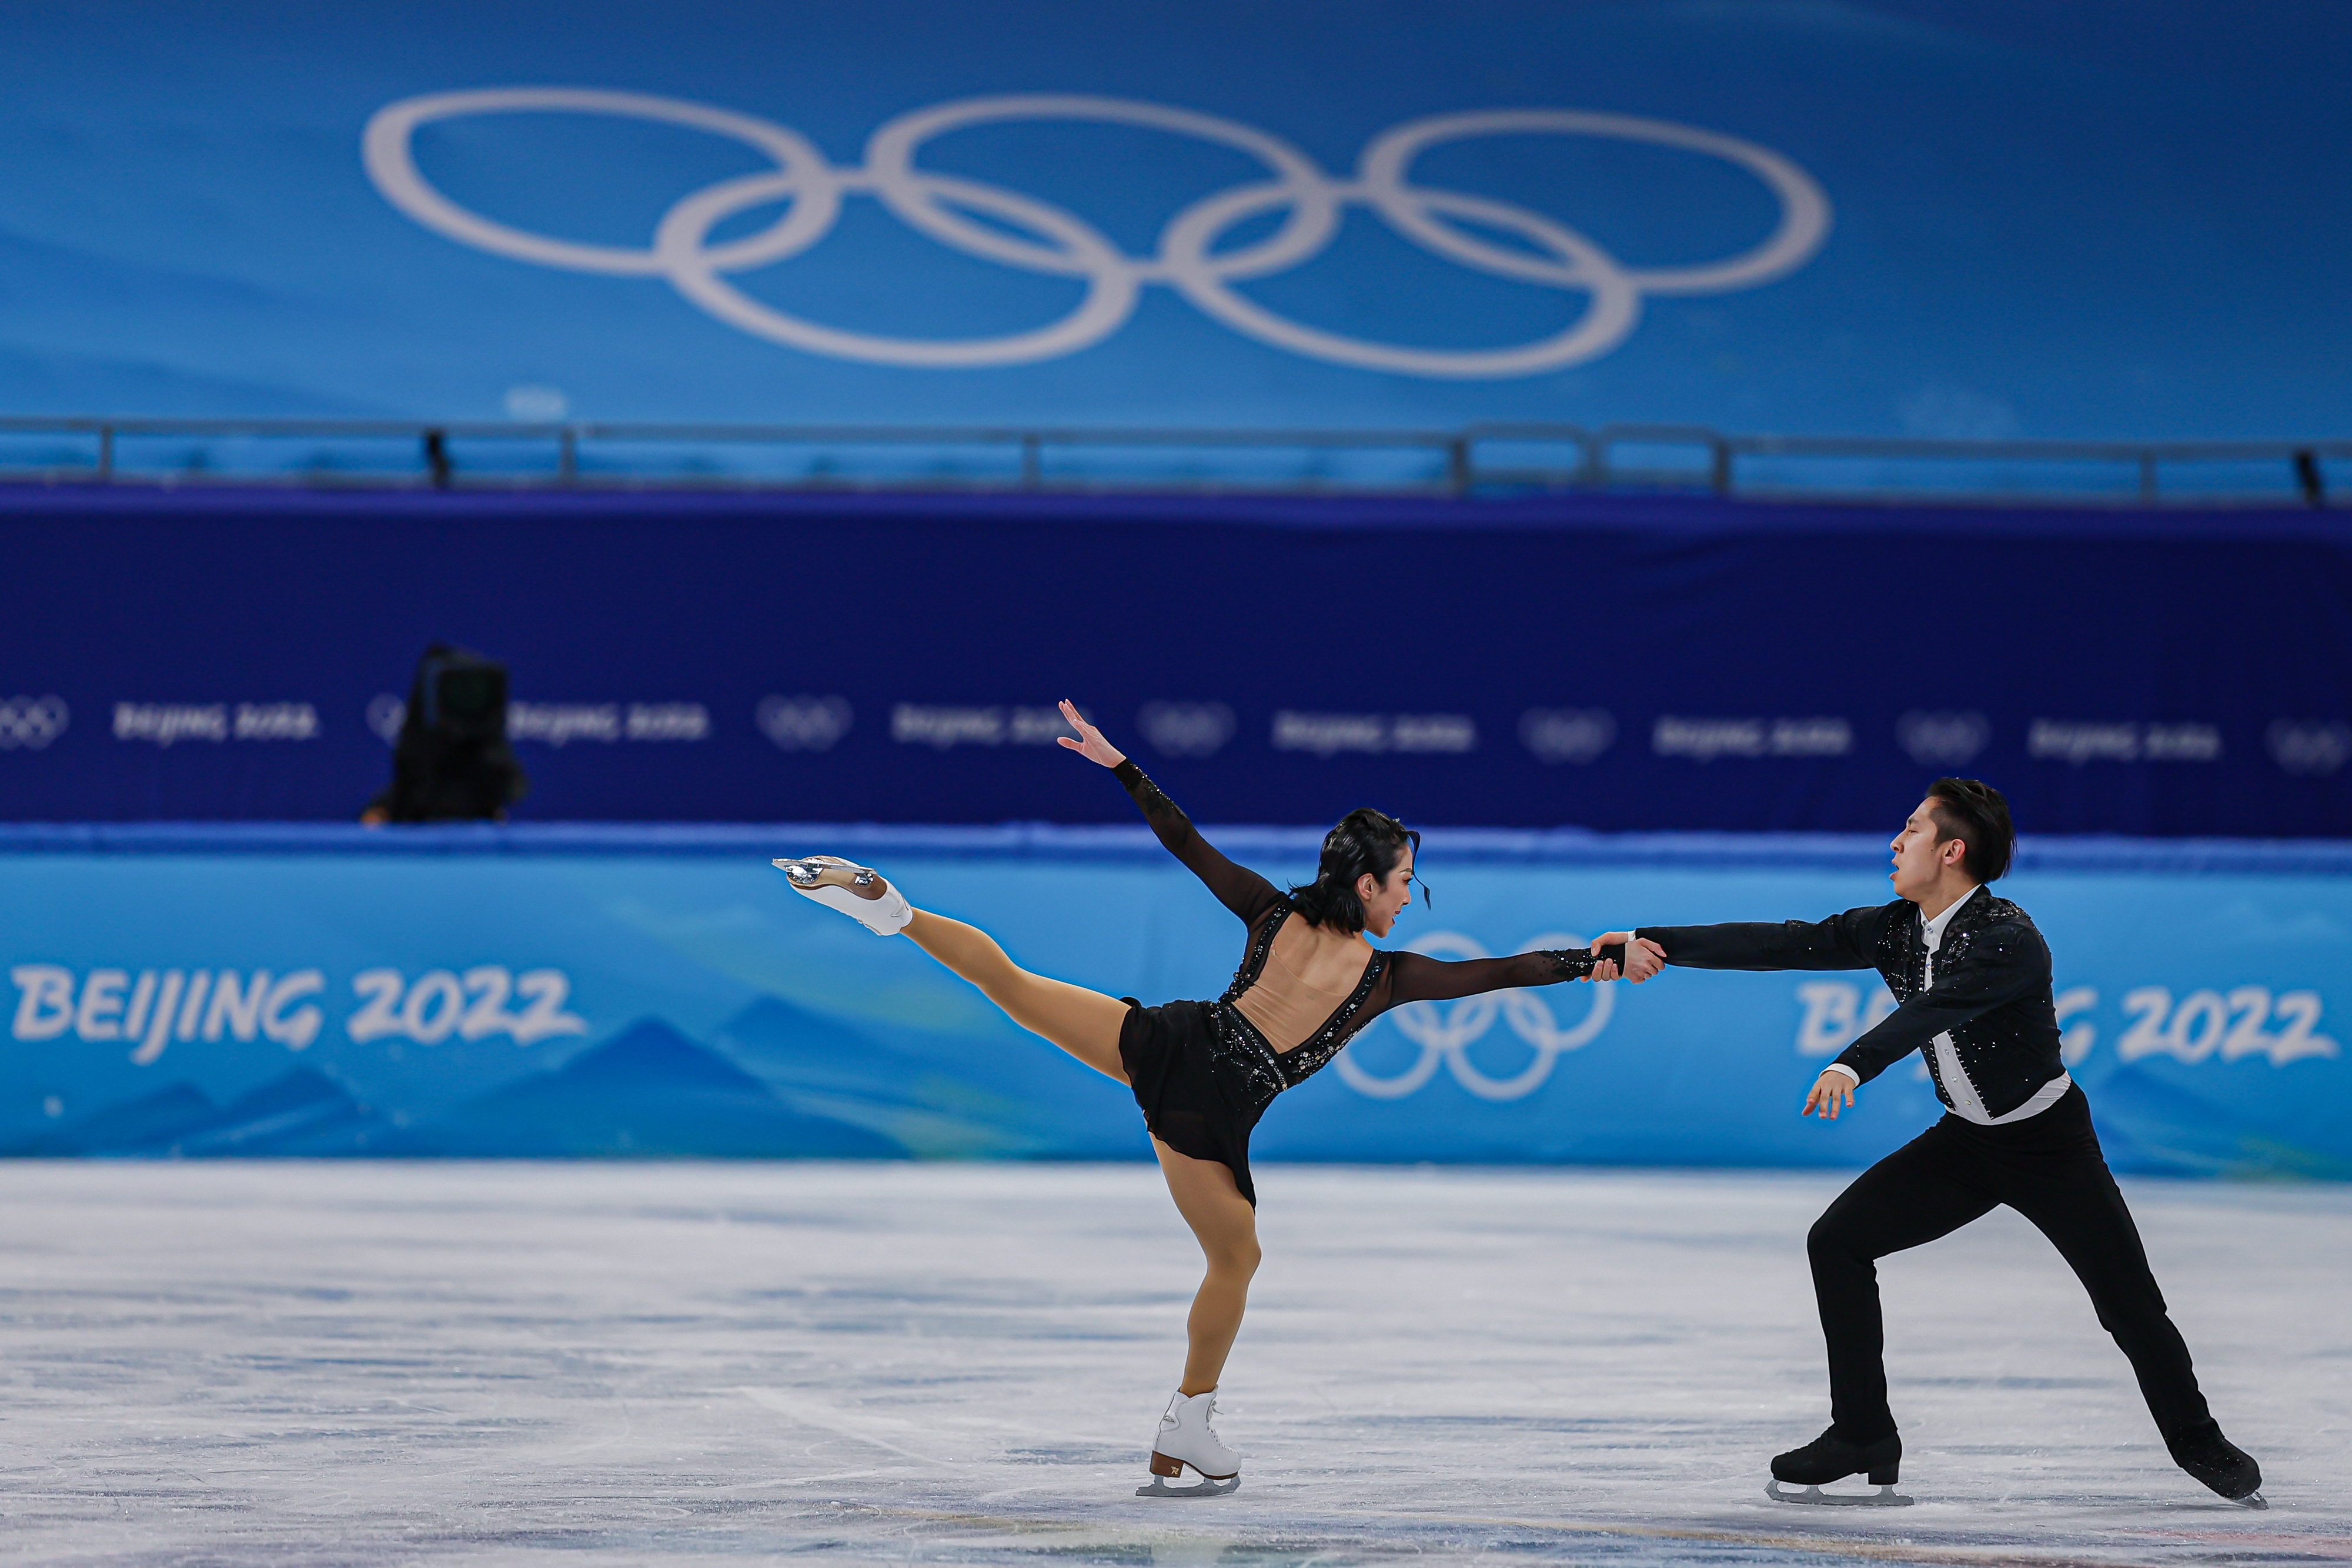 China, ROC In Lead After Pairs Figure Skating Short Program